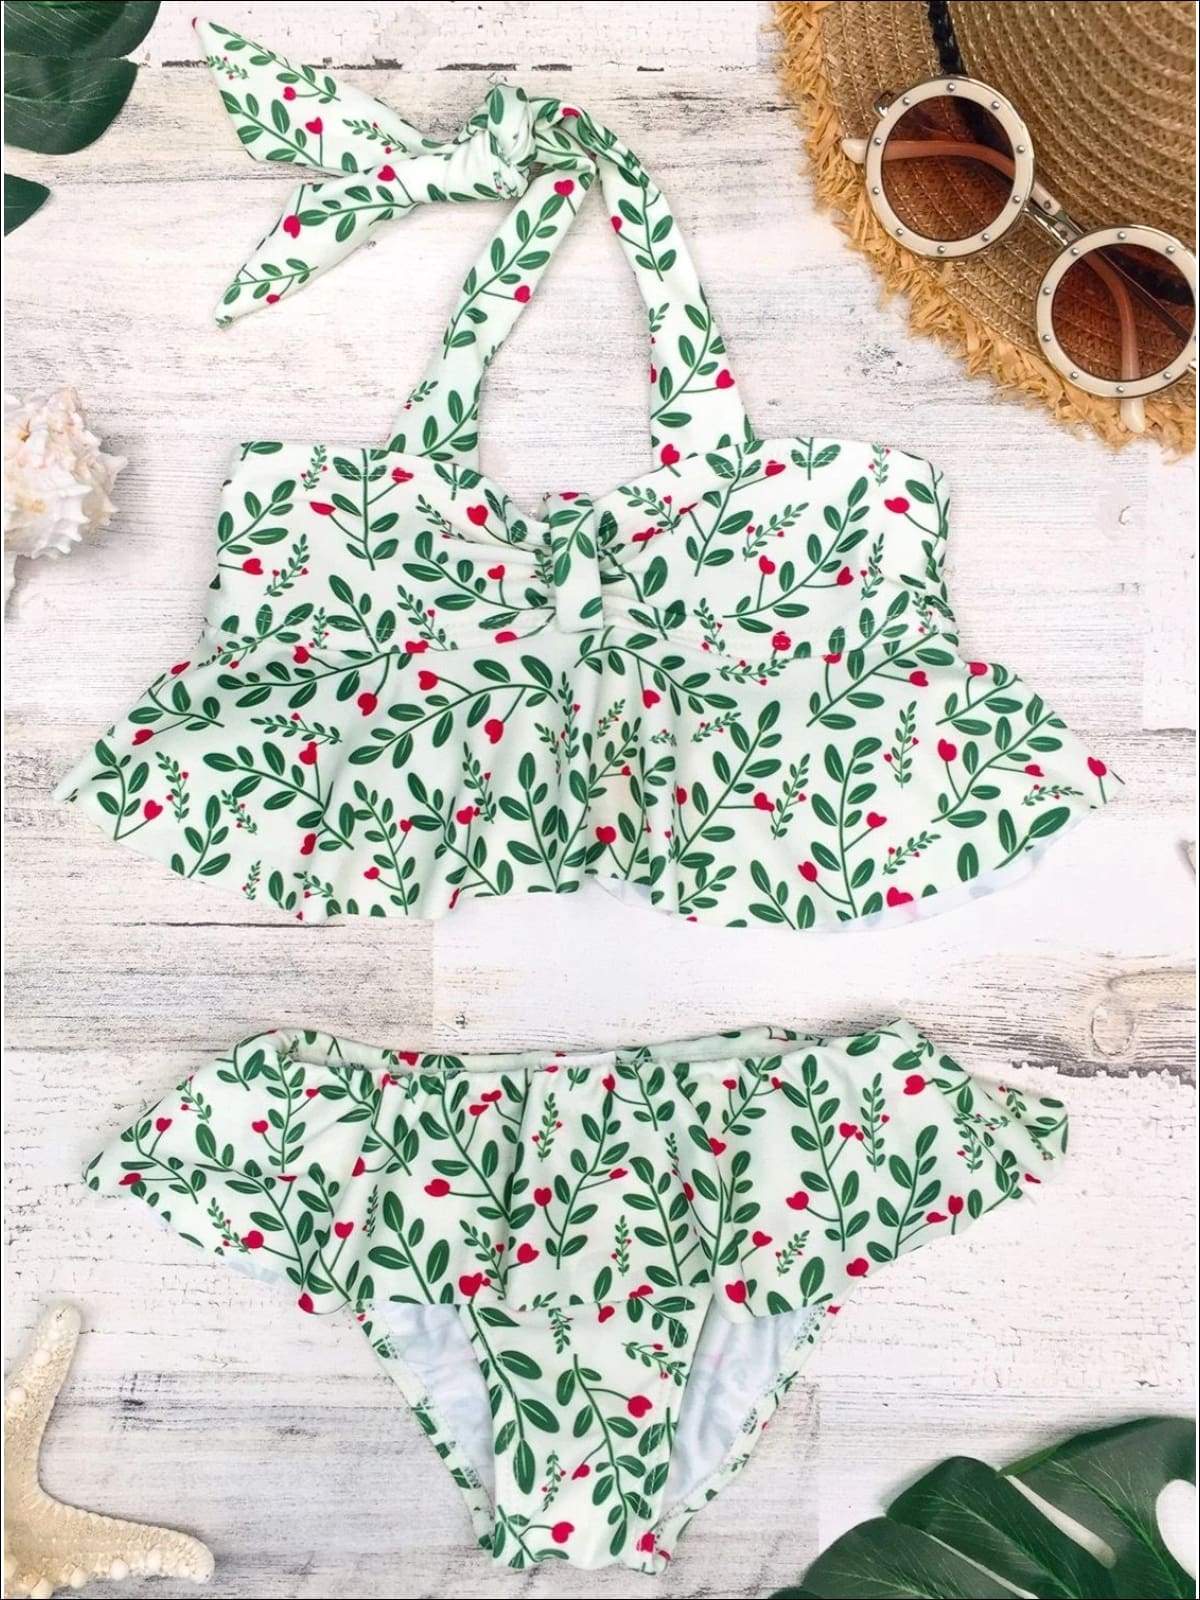 https://cdn.shopify.com/s/files/1/0996/1812/products/girls-white-heart-leaf-print-ruffled-halter-top-skirted-bottom-two-piece-swimsuit-20-39-99-40-59-2t3t-4t5y-6y6x-mia-belle-baby-875.jpg